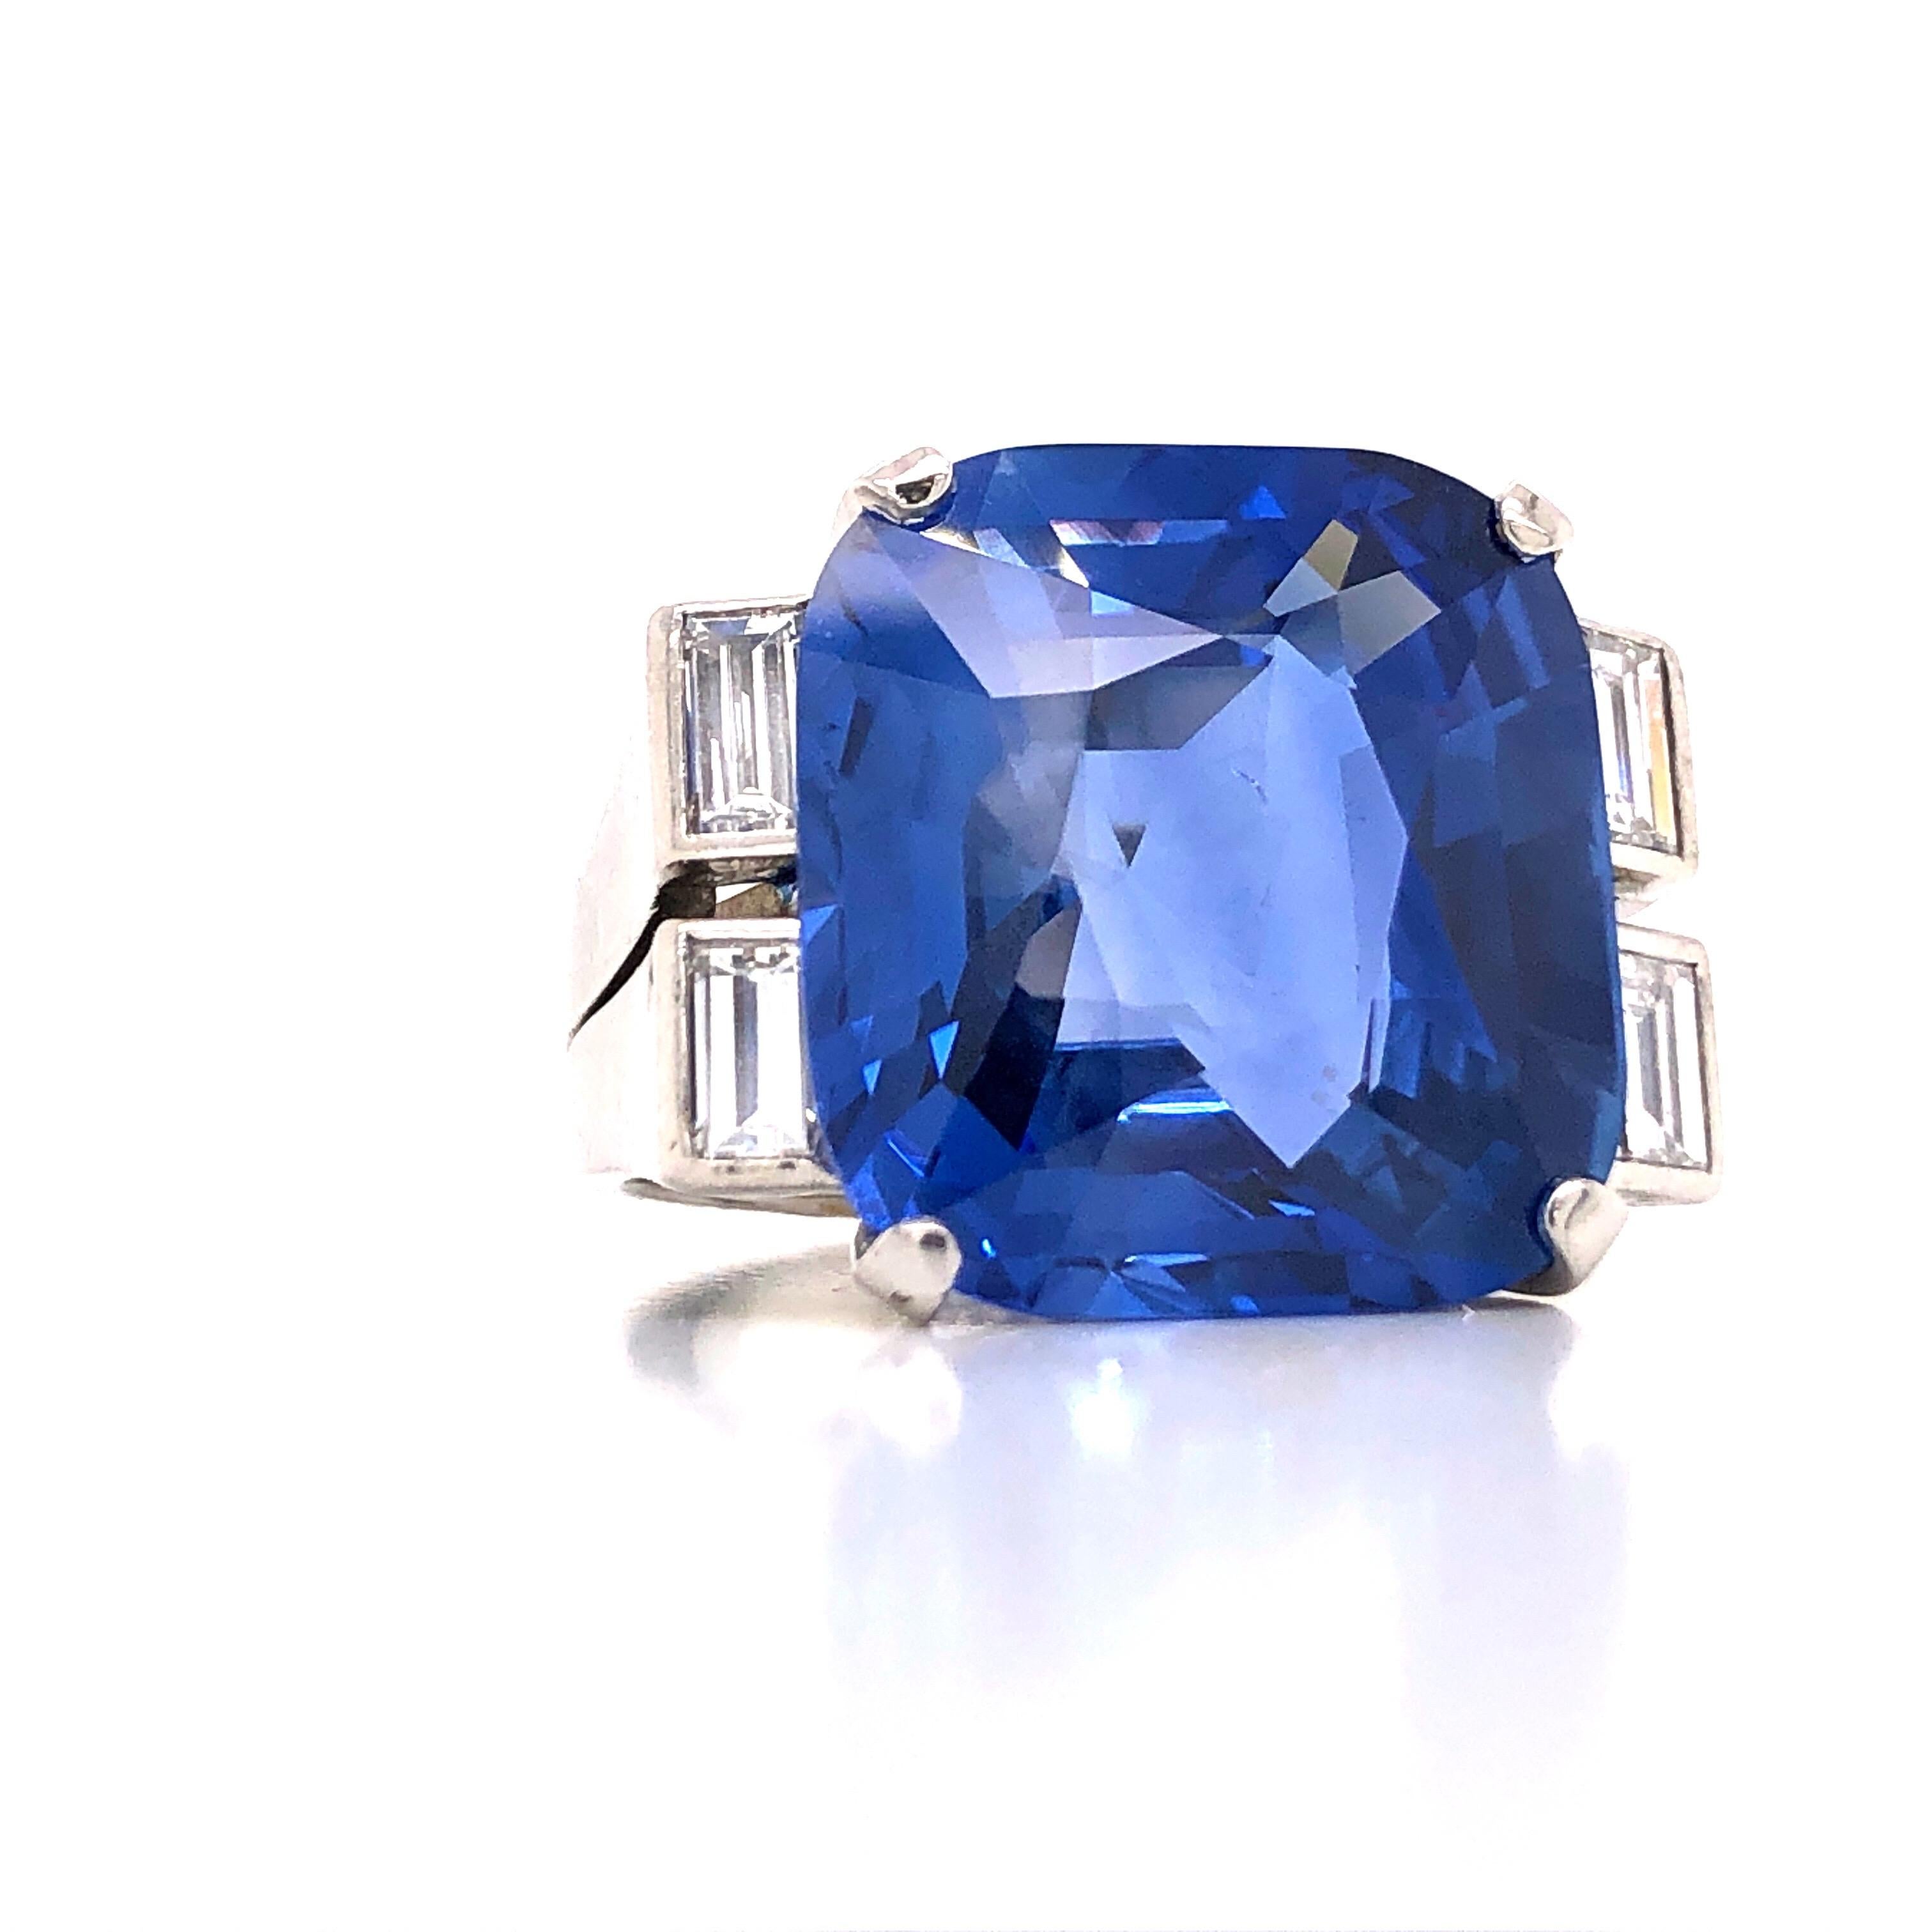 Emilio Jewelry 22.75 Carat No Heat Sapphire Diamond Ring 
This amazing ring is unique and well thought out before Emilio designed it! Most women today want a ring that is striking, yet humble enough to wear to perform everyday errands. This ring is